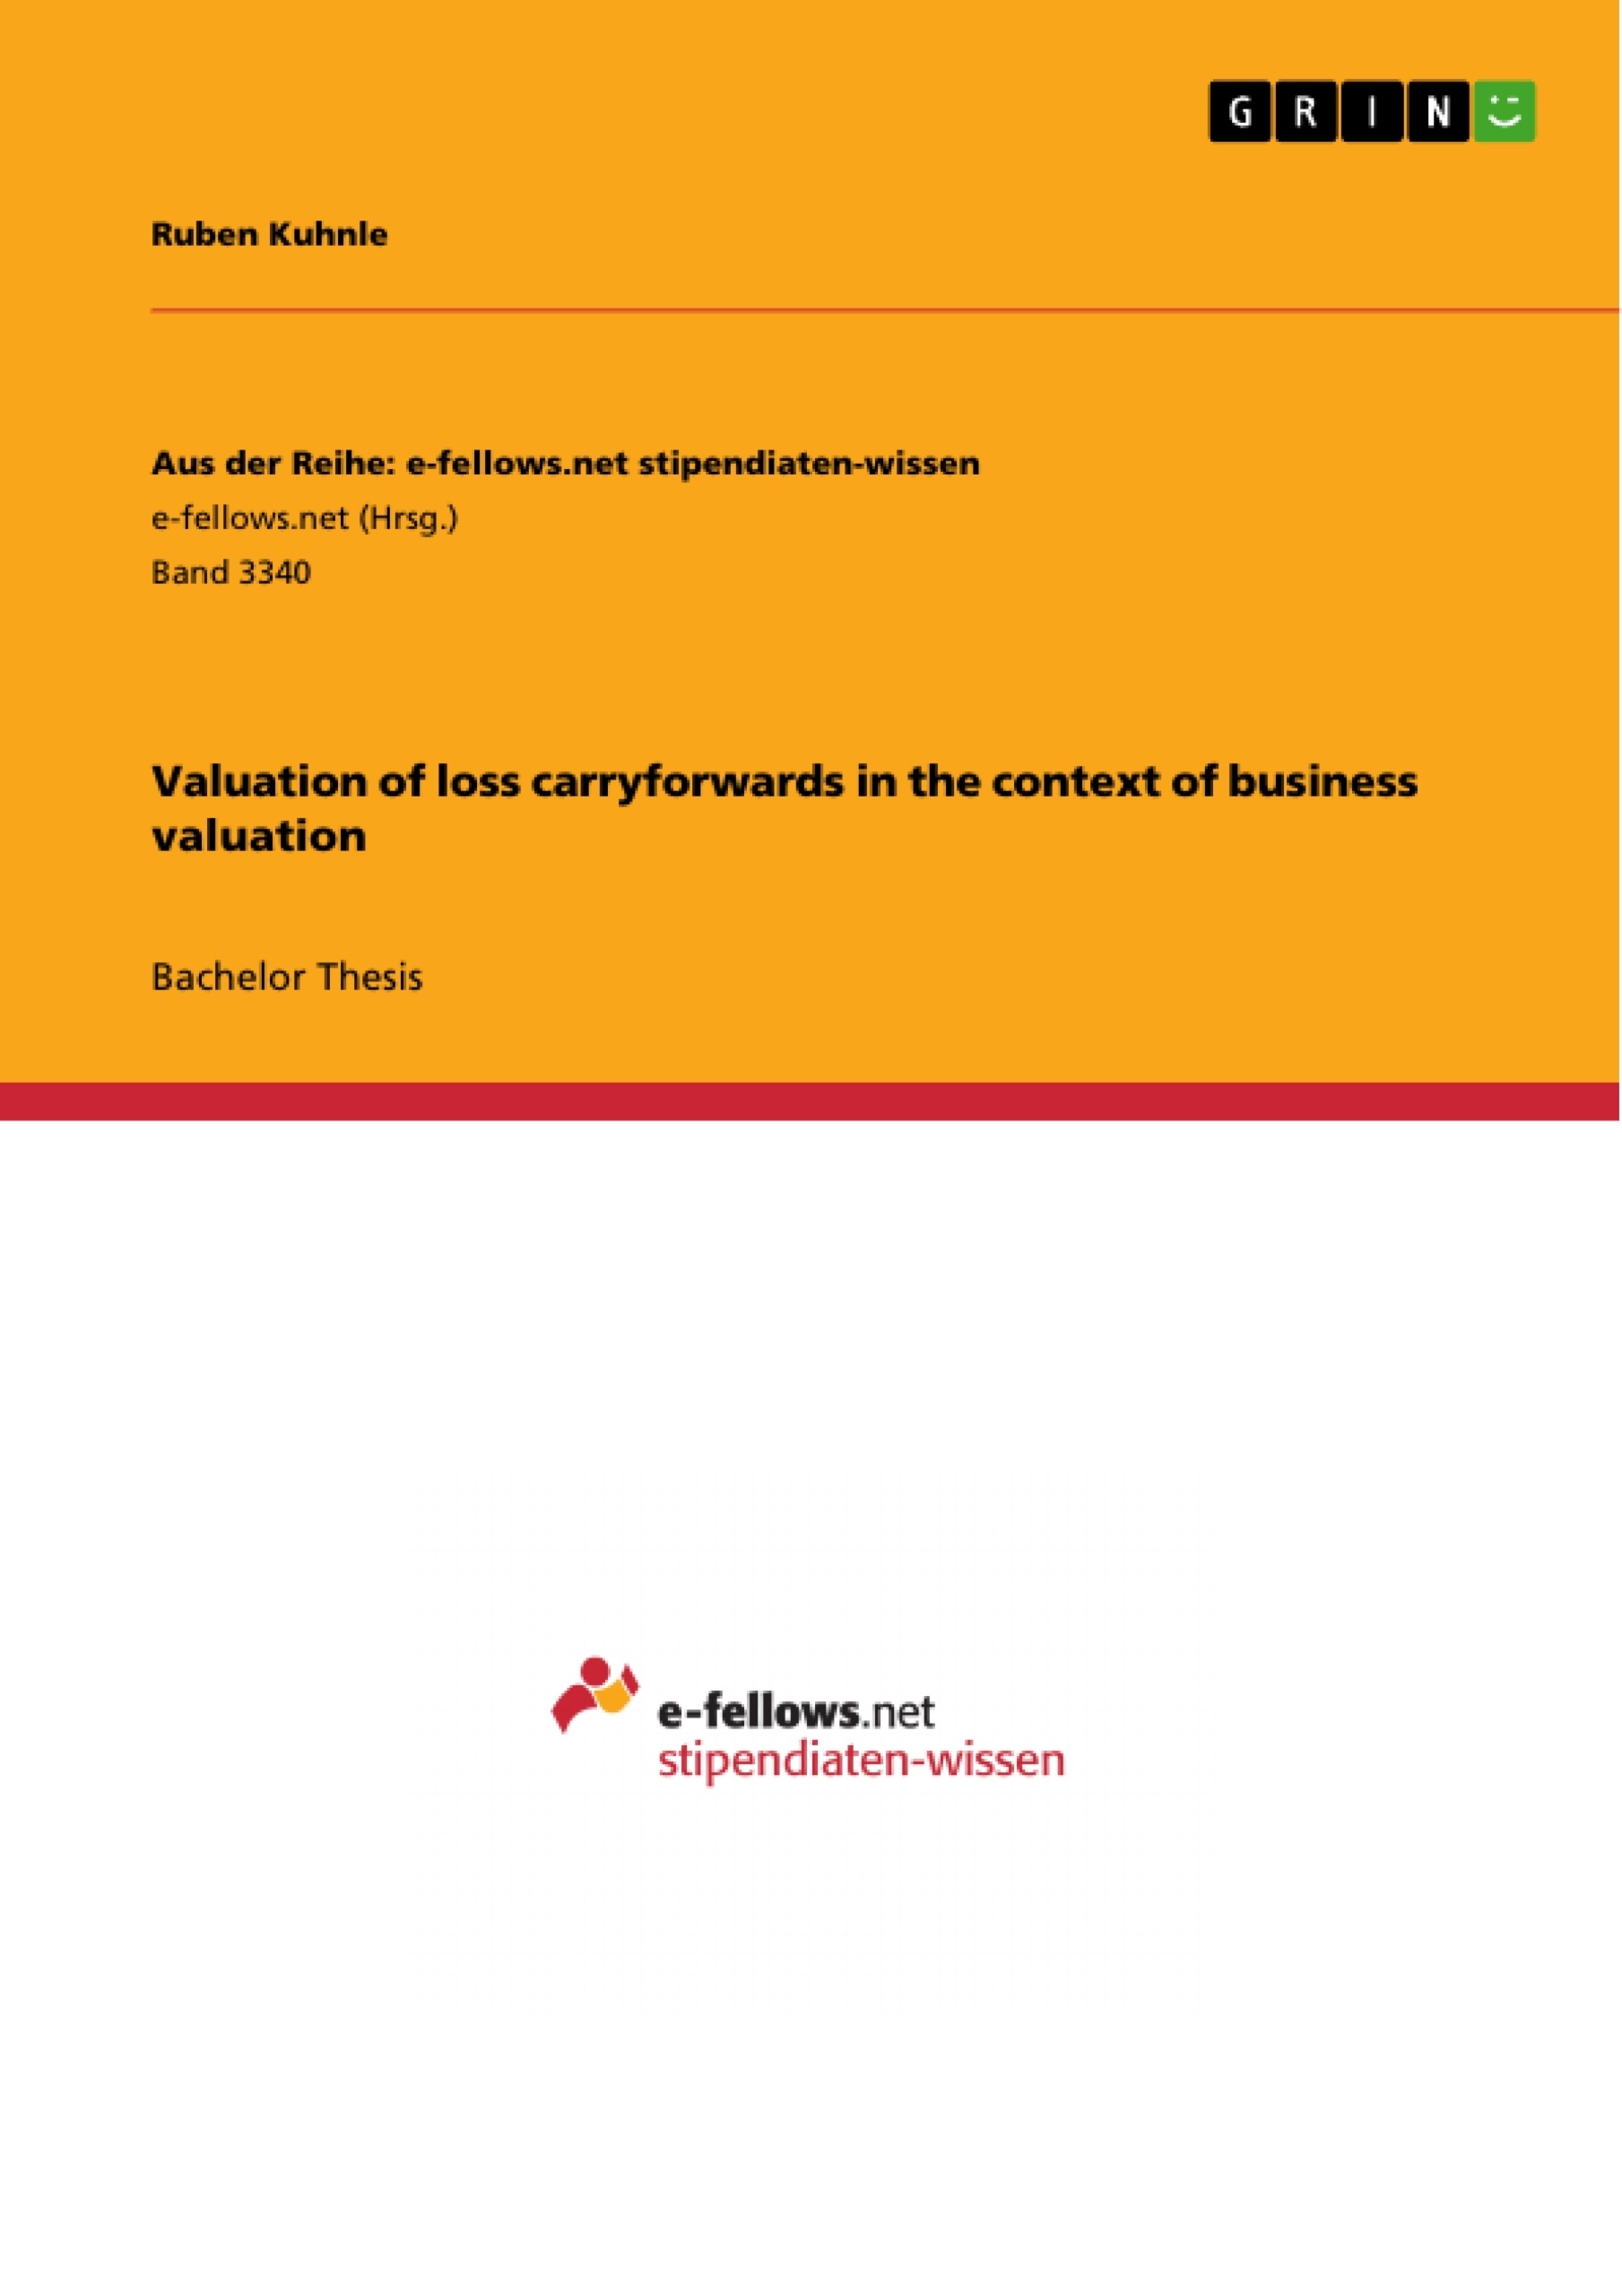 Title: Valuation of loss carryforwards in the context of business valuation